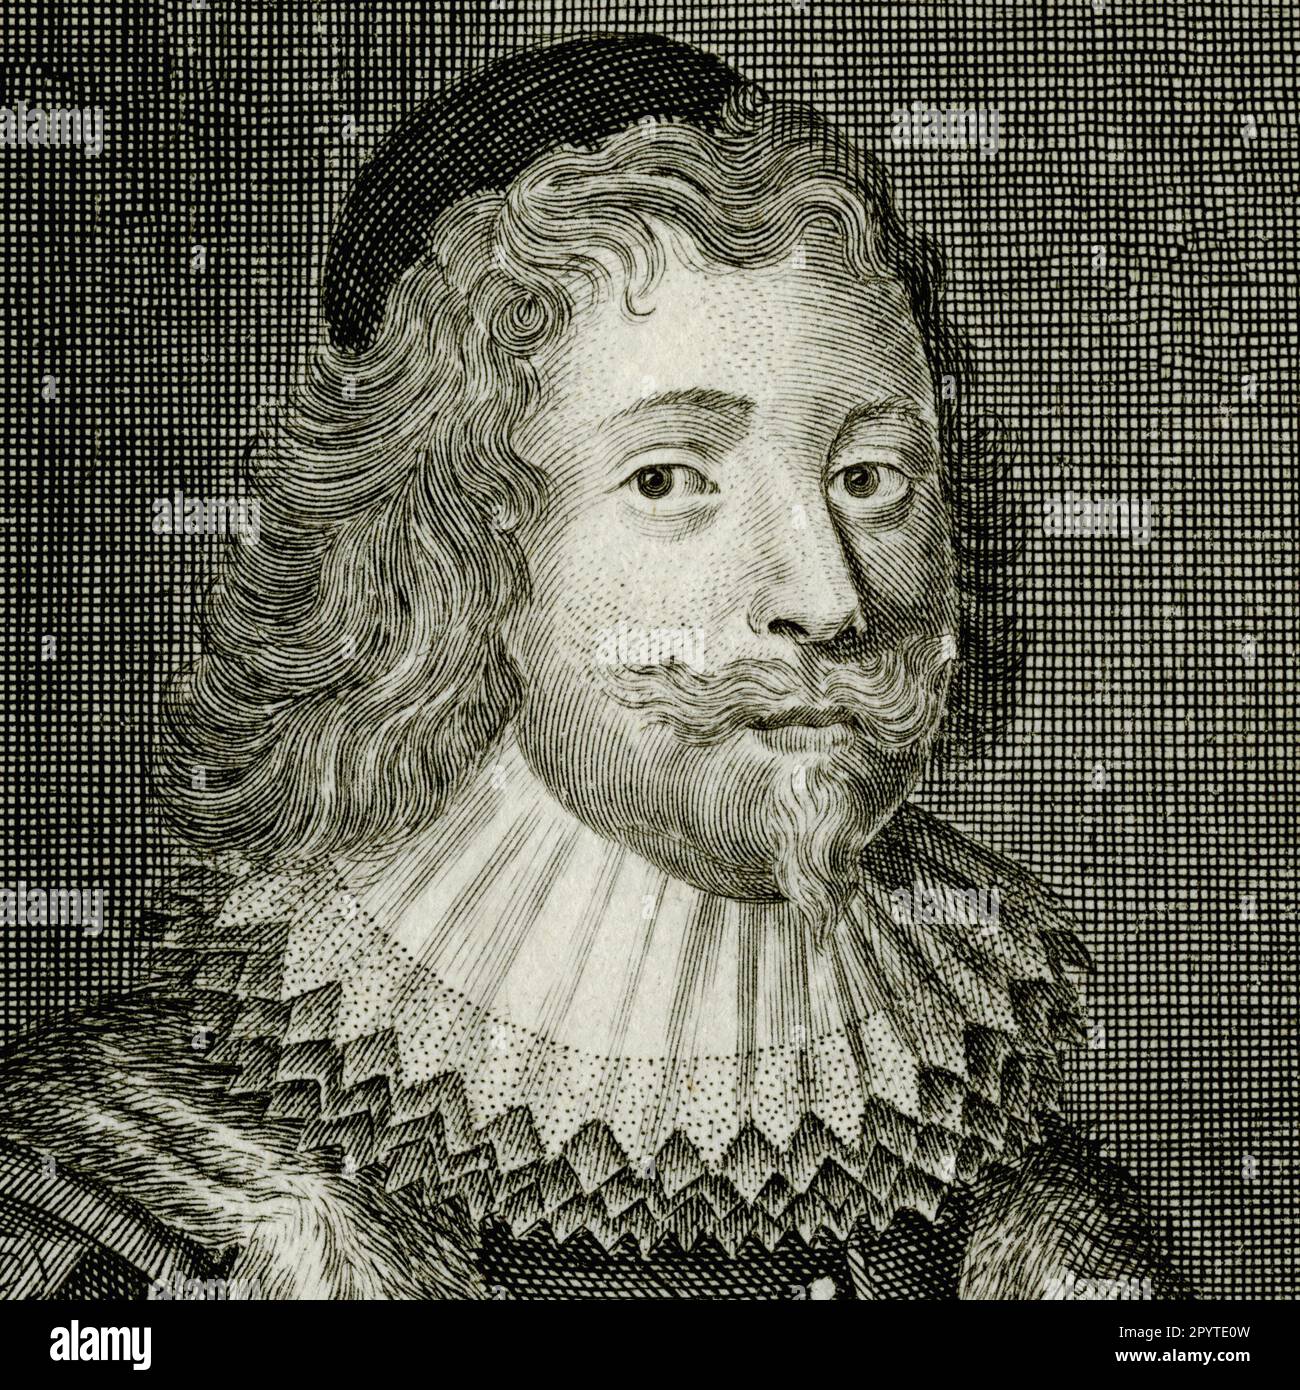 John Finch (1584-1660), Lord Finch of Fordwich, Royalist Speaker of the House of Commons prior to the English Civil War. In 1637, as Chief Justice of the Court of Common Pleas, Finch presided over the trial of MP John Hampden, a leading parliamentarian and opponent of the king, for failing to pay 'Ship Money', a hated tax.  Square detail of engraving created in the 1700s by George Vertue (1683-1756), after a portrait by Cornelius Johnson (1593-1661). Stock Photo